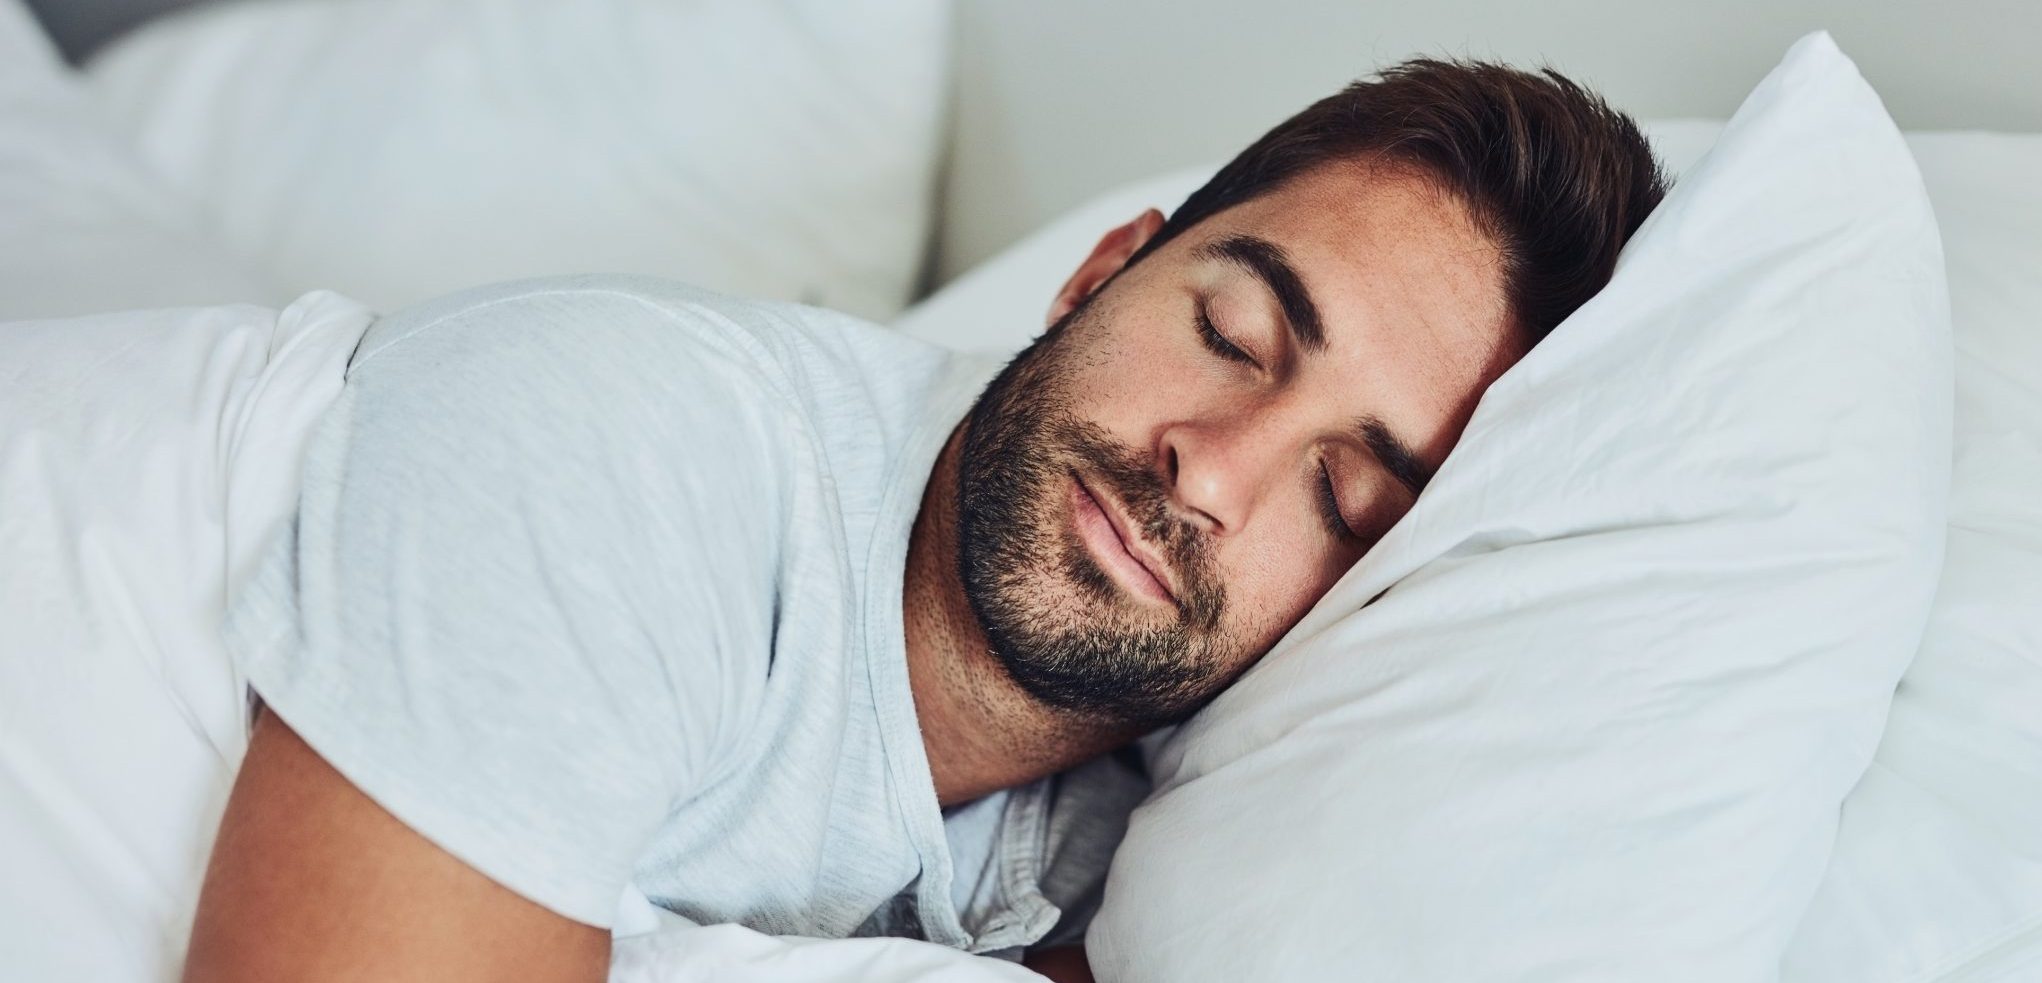 Sleeping with High Blood Sugar: What to Watch out for